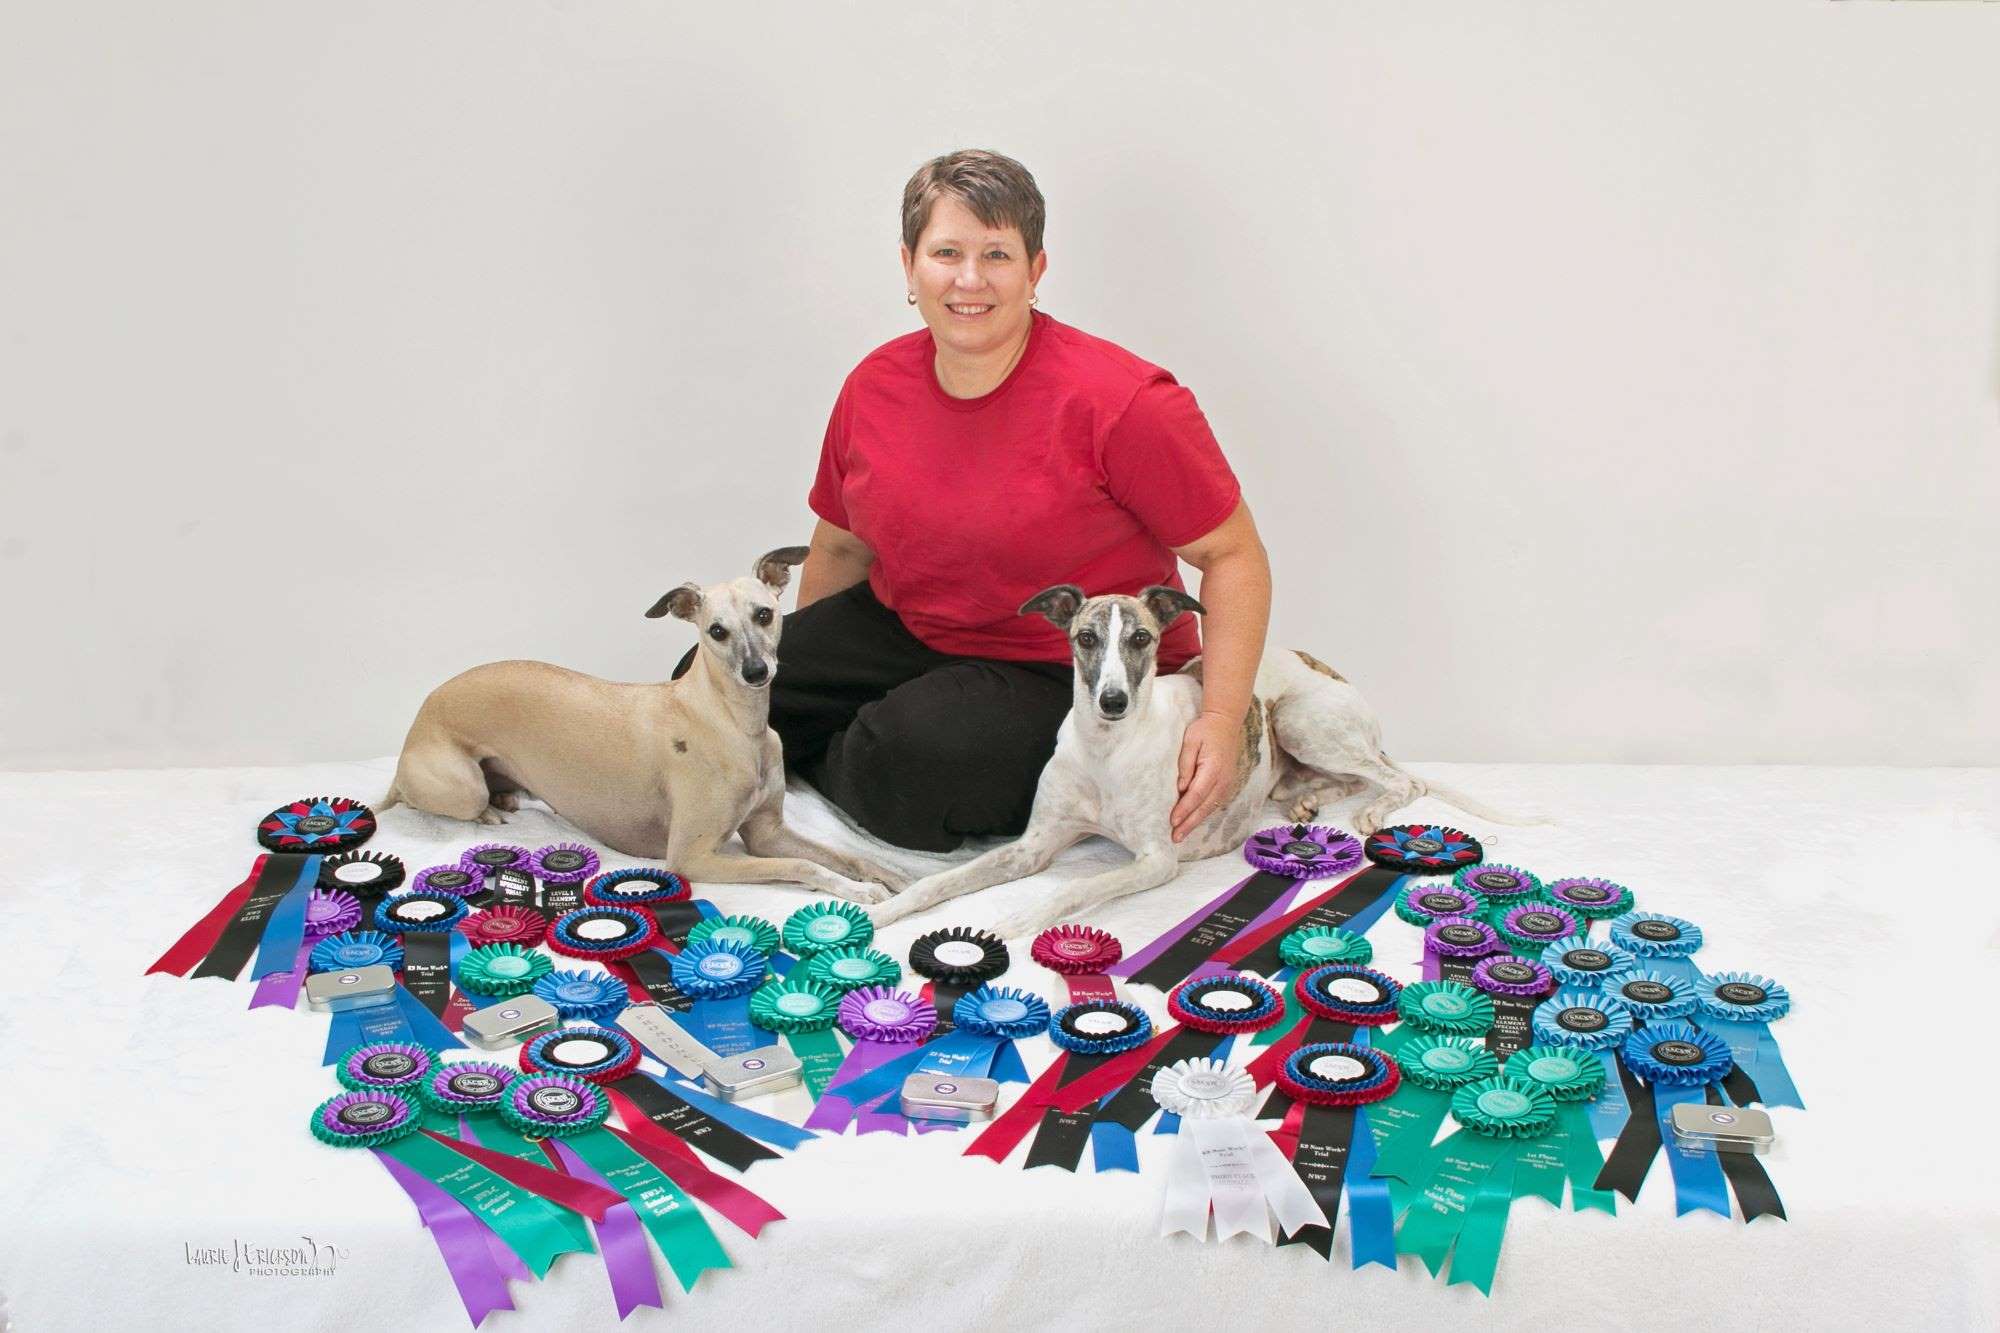 Woman with short brown hair wearing a red shirt and black pants posing with two whippet dogs and numerous ribbons